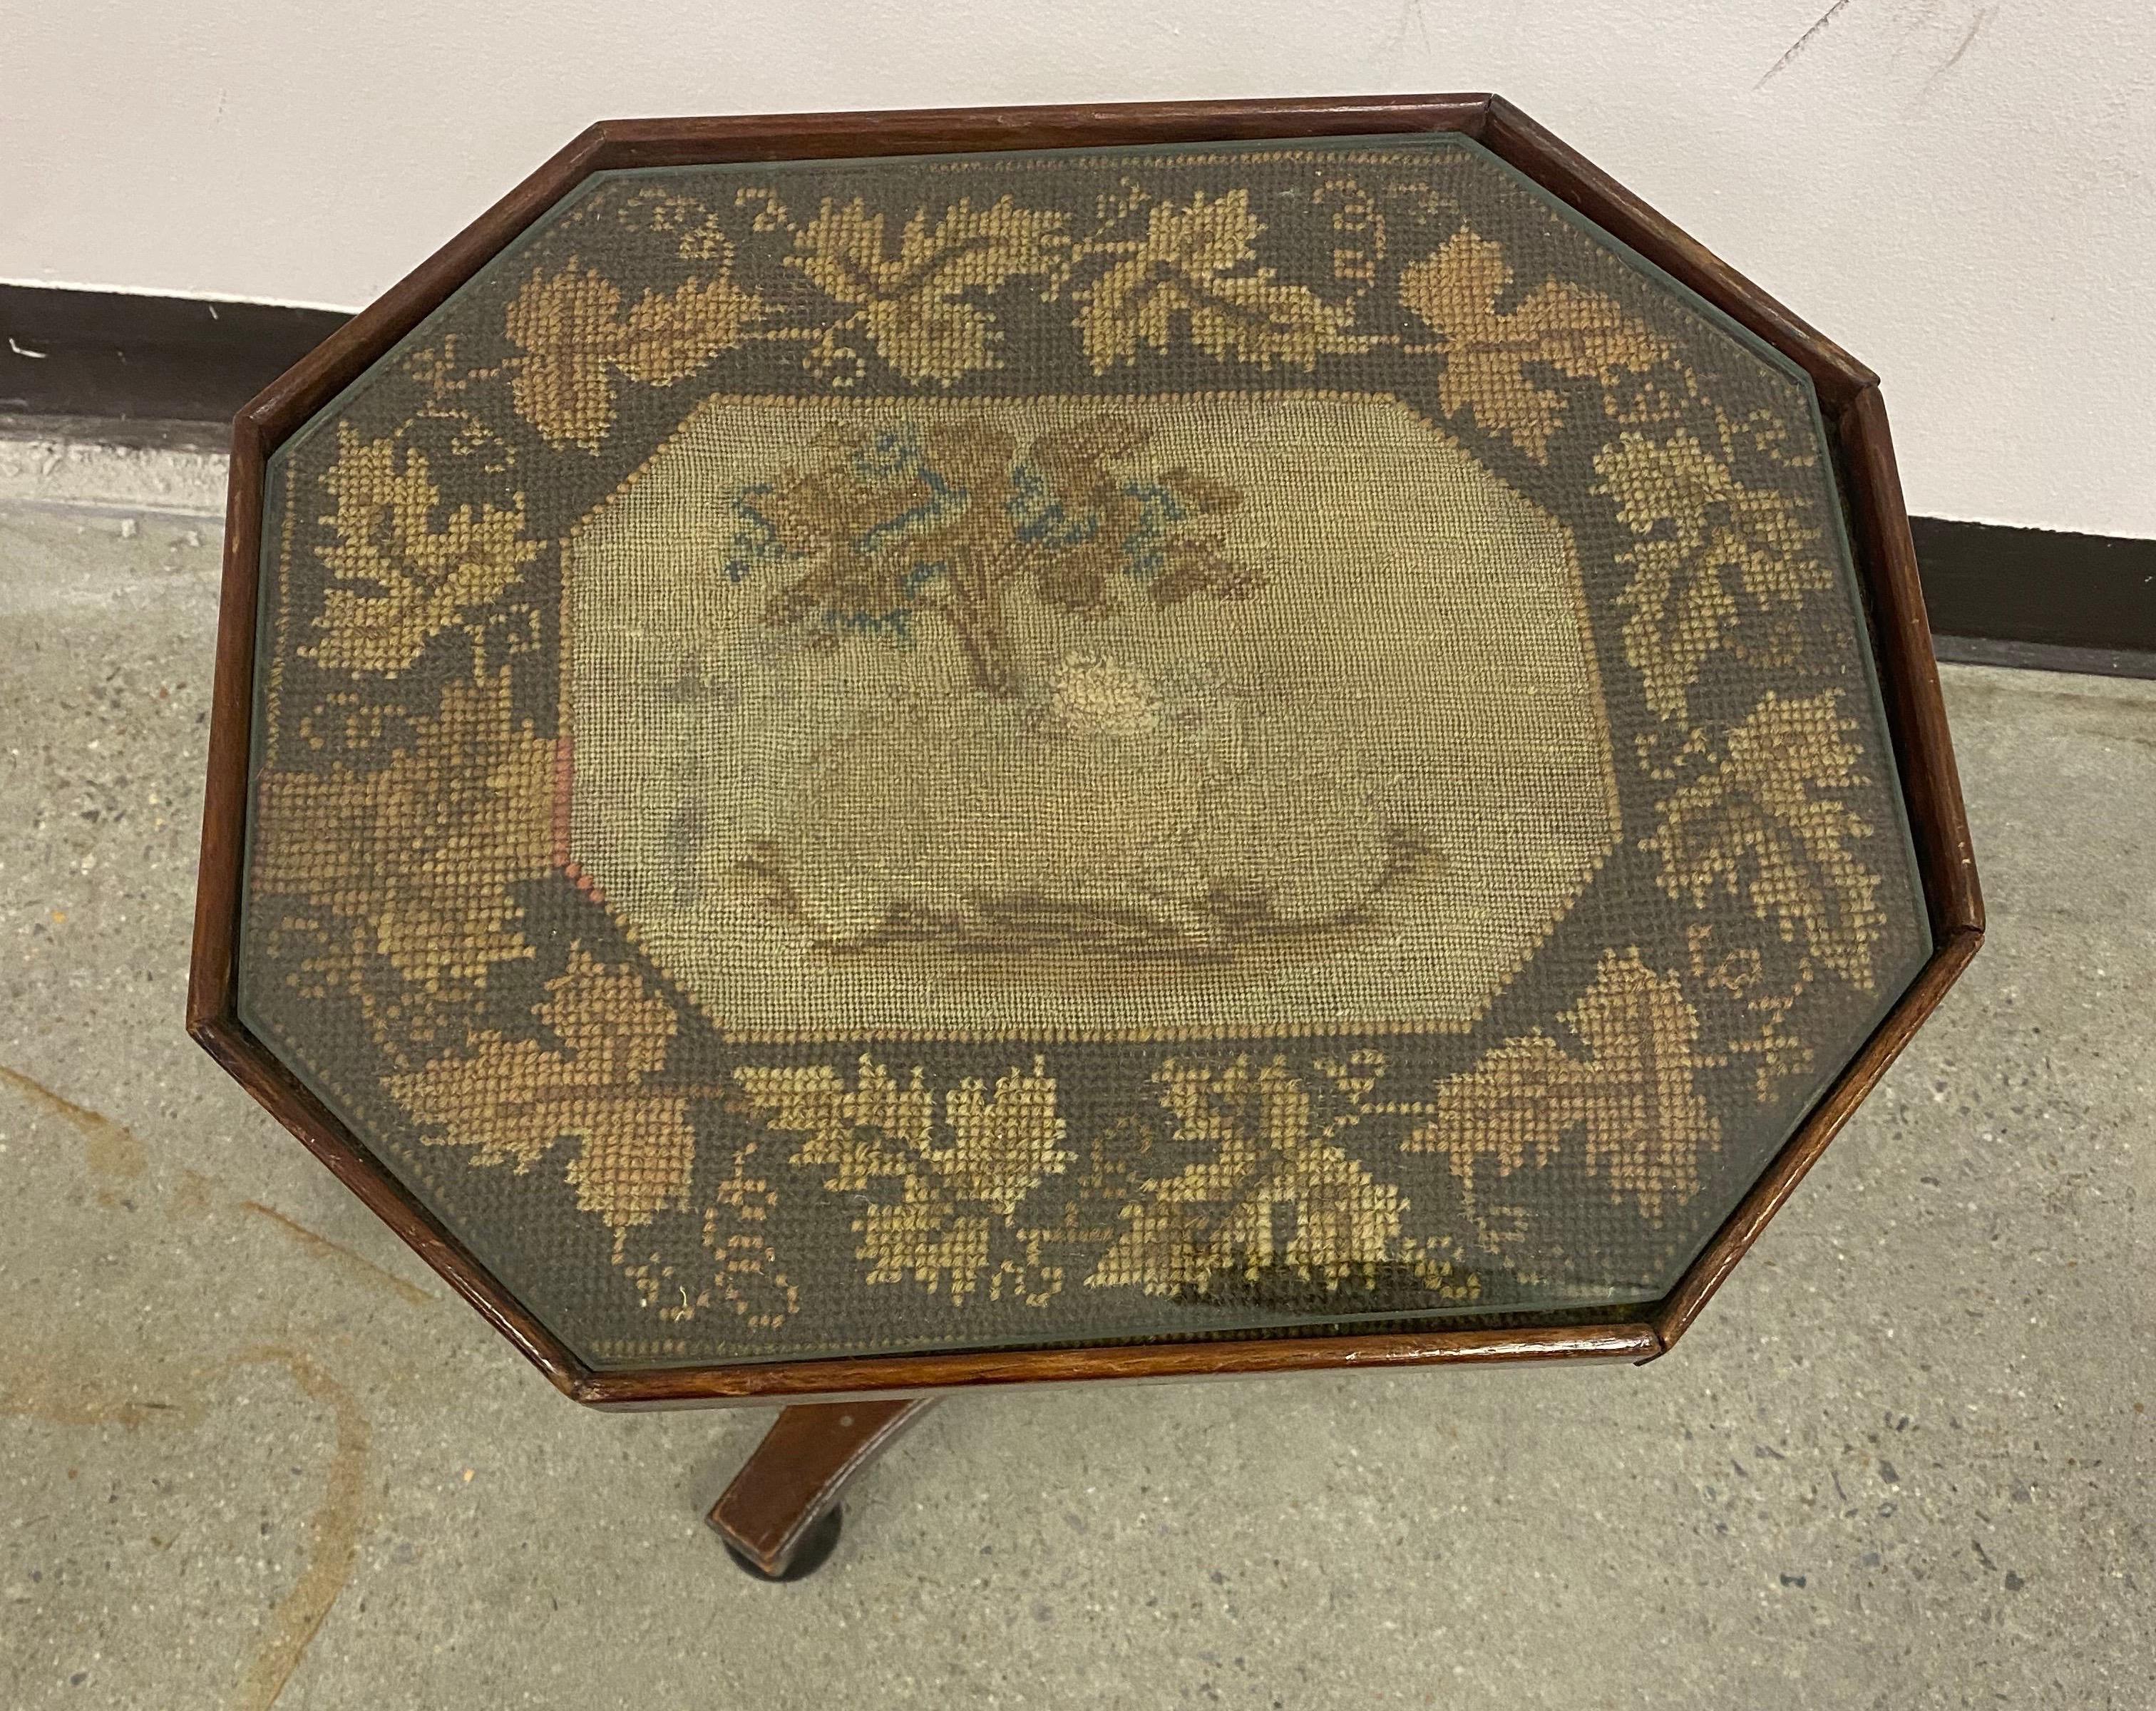 English 19th Century Regency Embroidered Top Mahogany Side Table